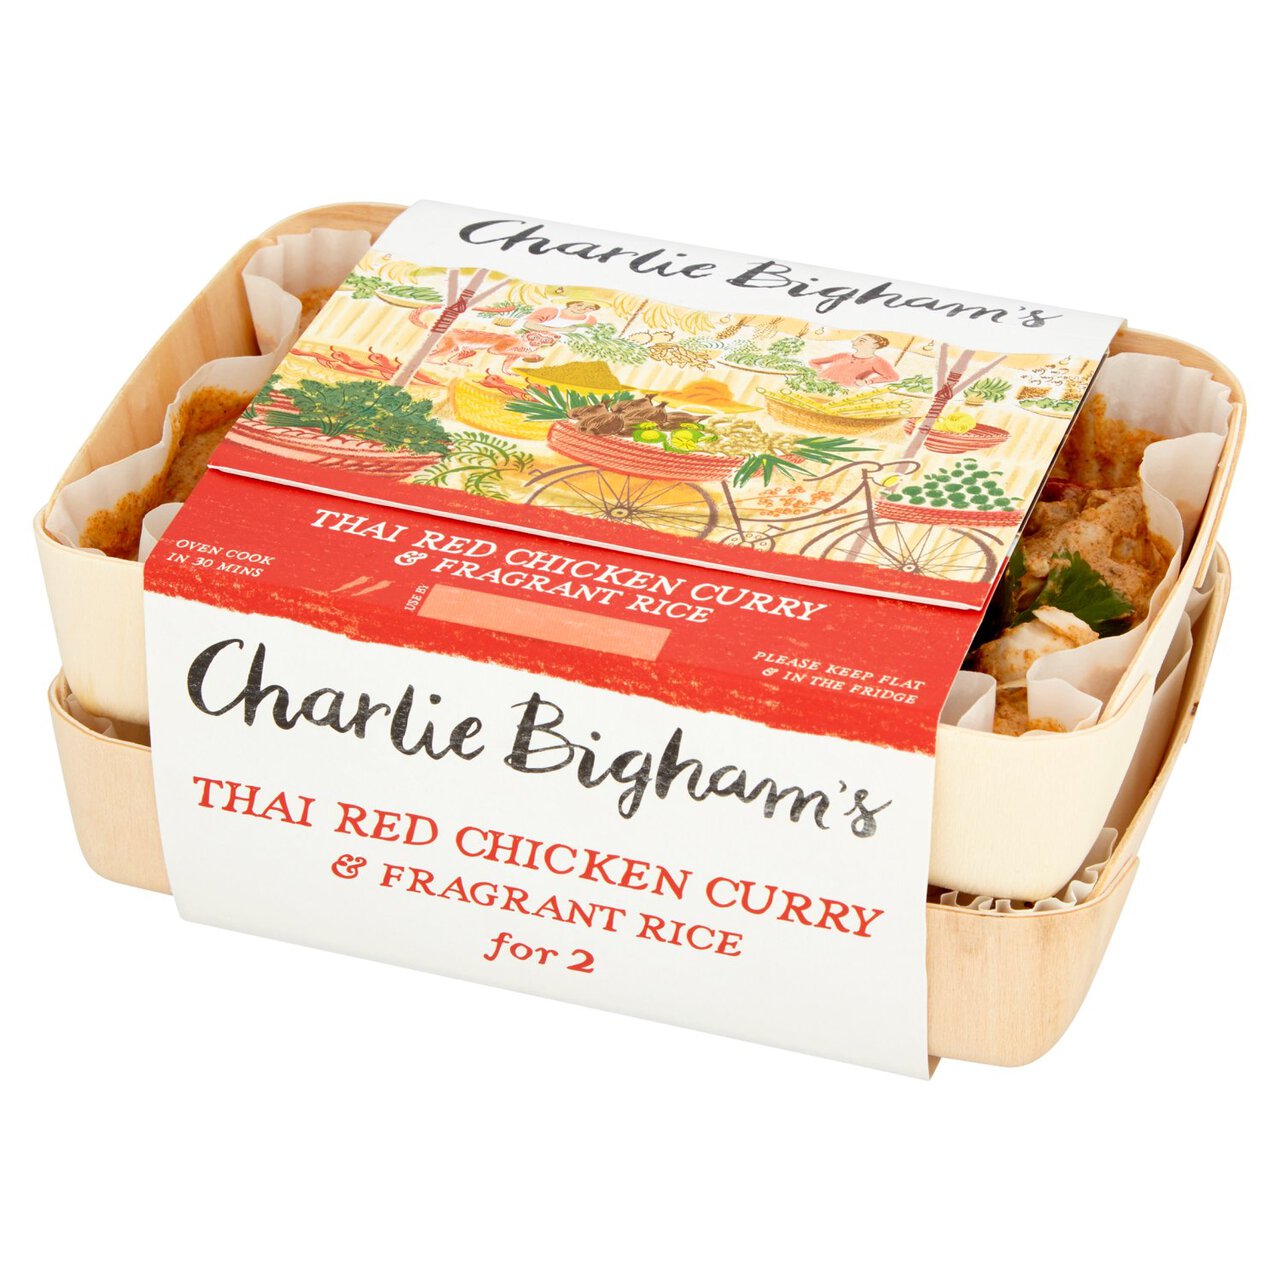 Charlie Bigham's Thai Red Chicken Curry & Fragrant Rice for 2 835g